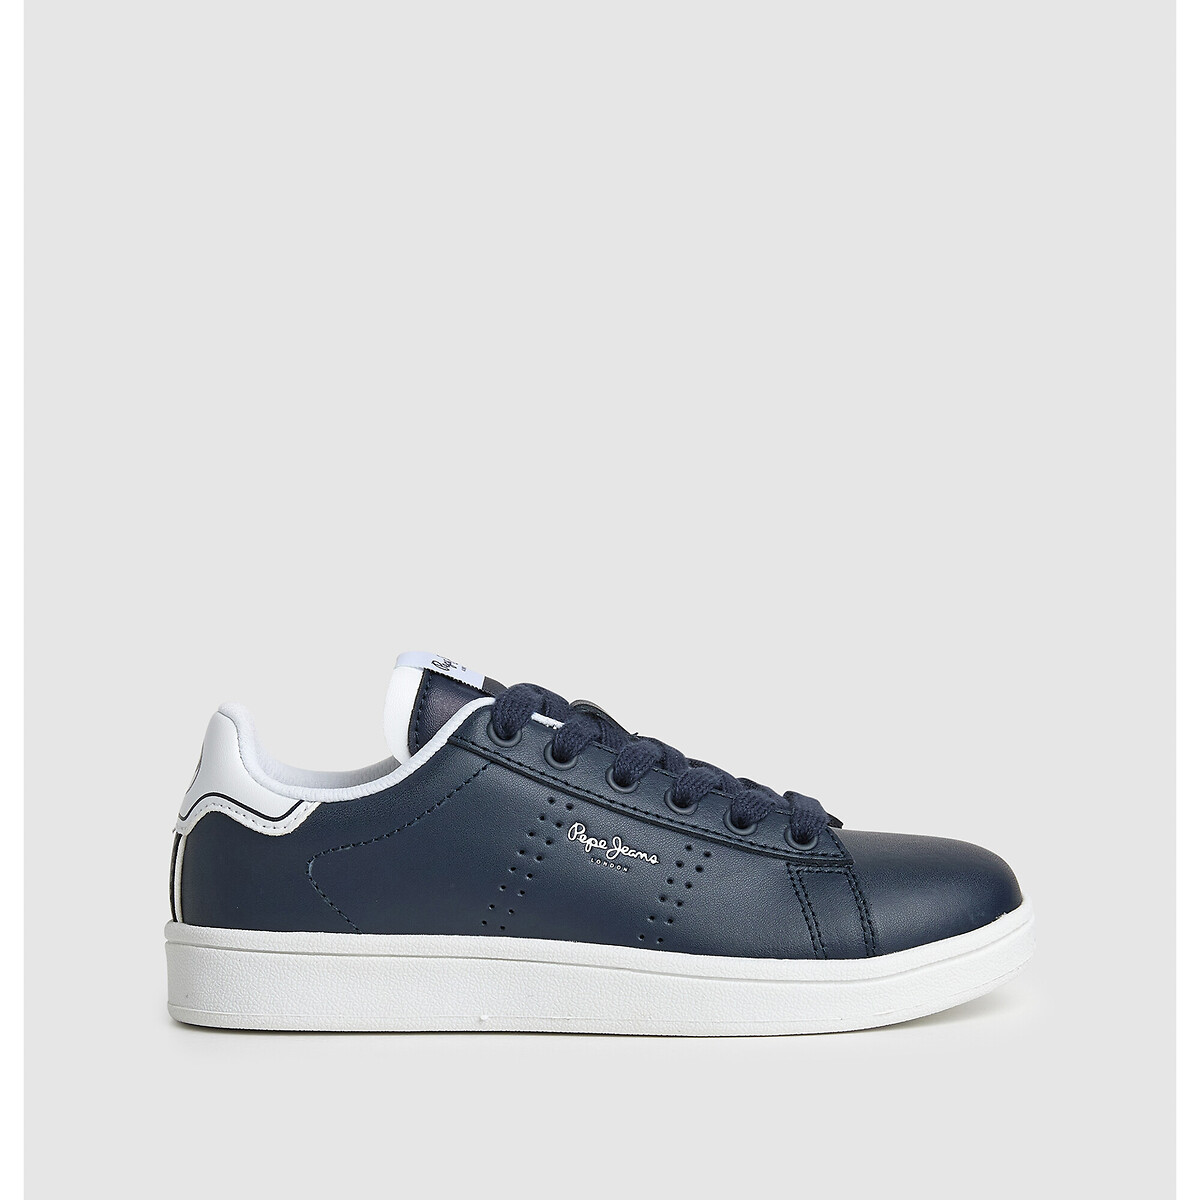 Sneakers Player Basics von Pepe Jeans